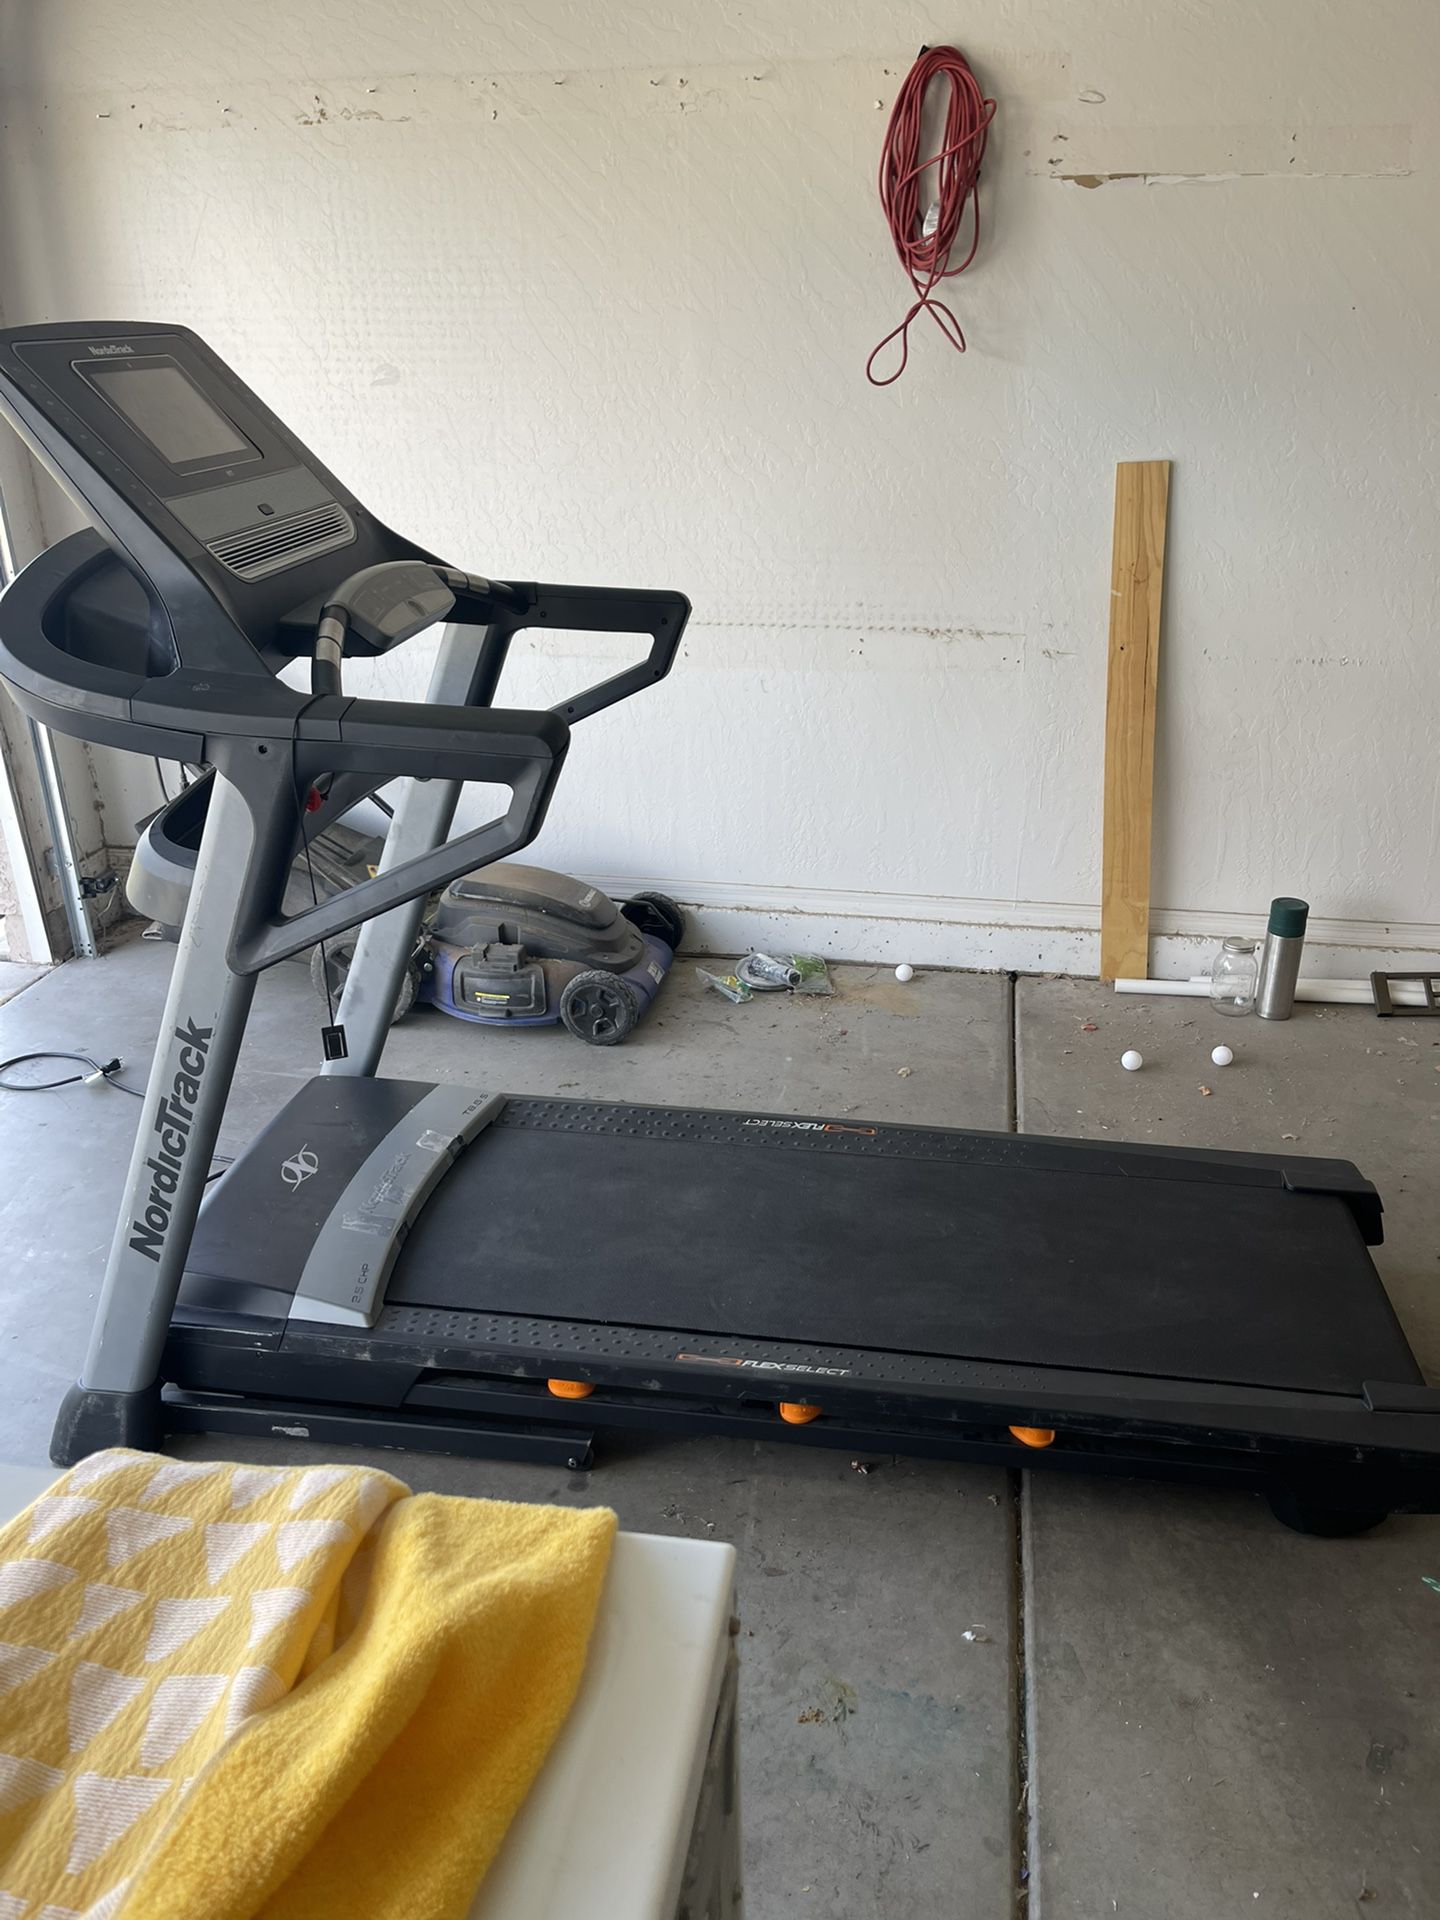 Nordic Trac Treadmill  Moving Need To Sell Asap I’m Moving And Need It Gone  